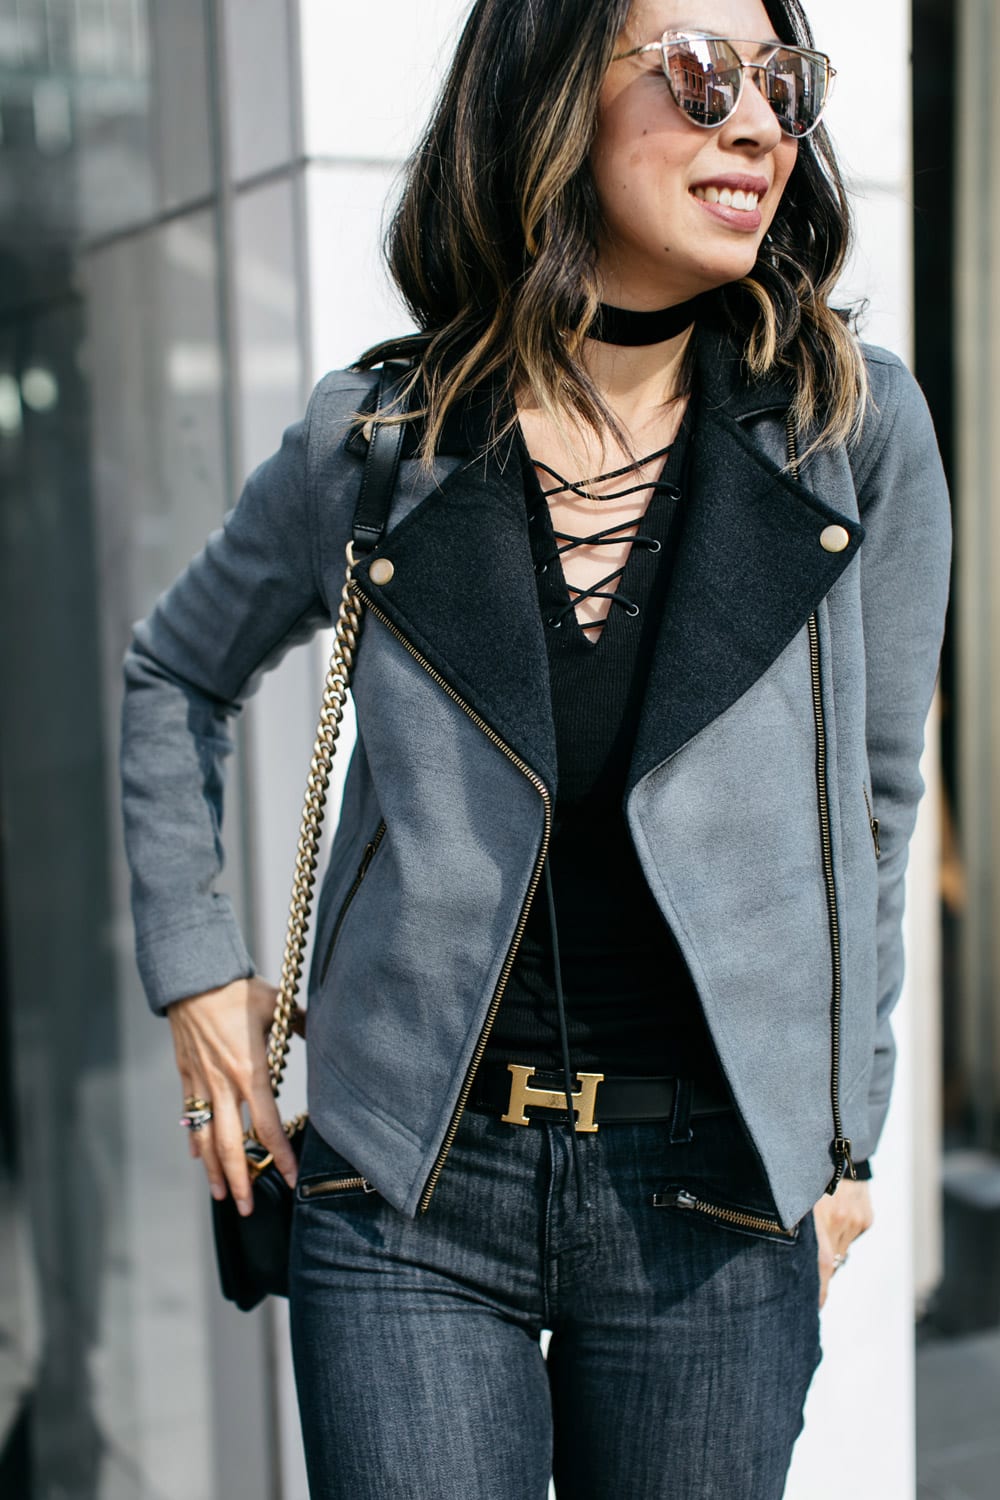 Style of Sam | Chic at Every Age Lilla P Moto Jacket